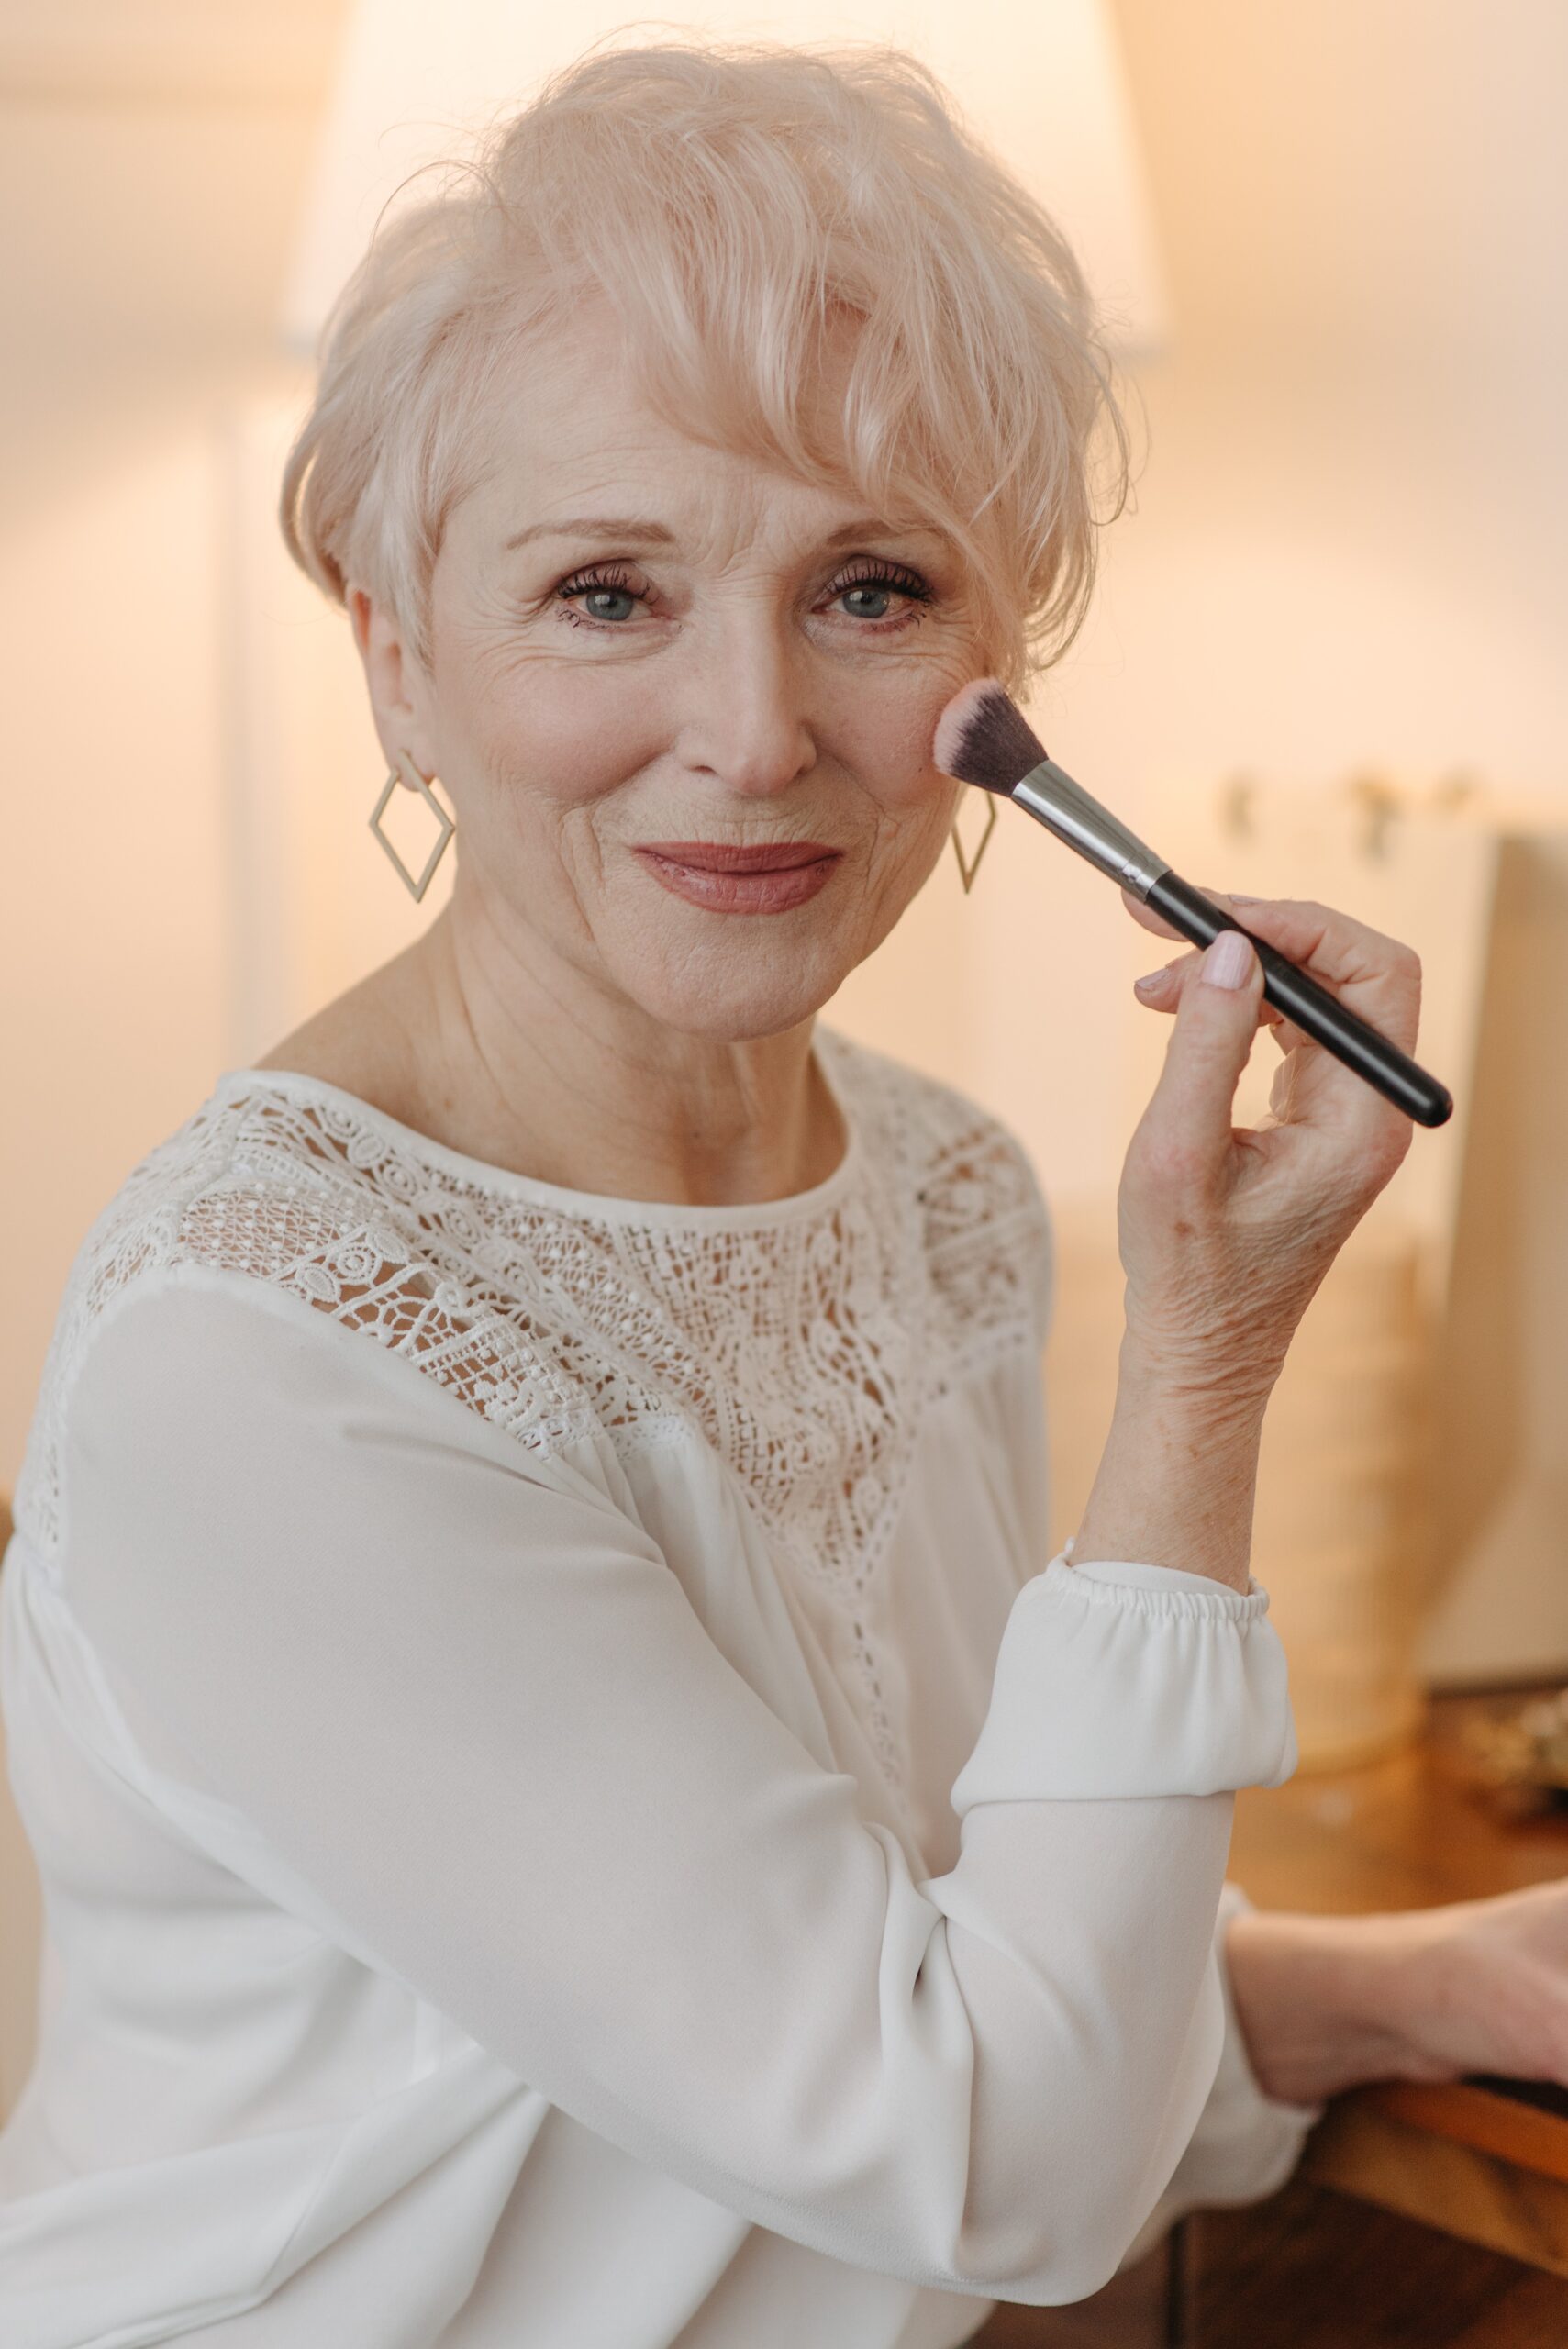 Makeup Tips for Mature Skin The Honest Image